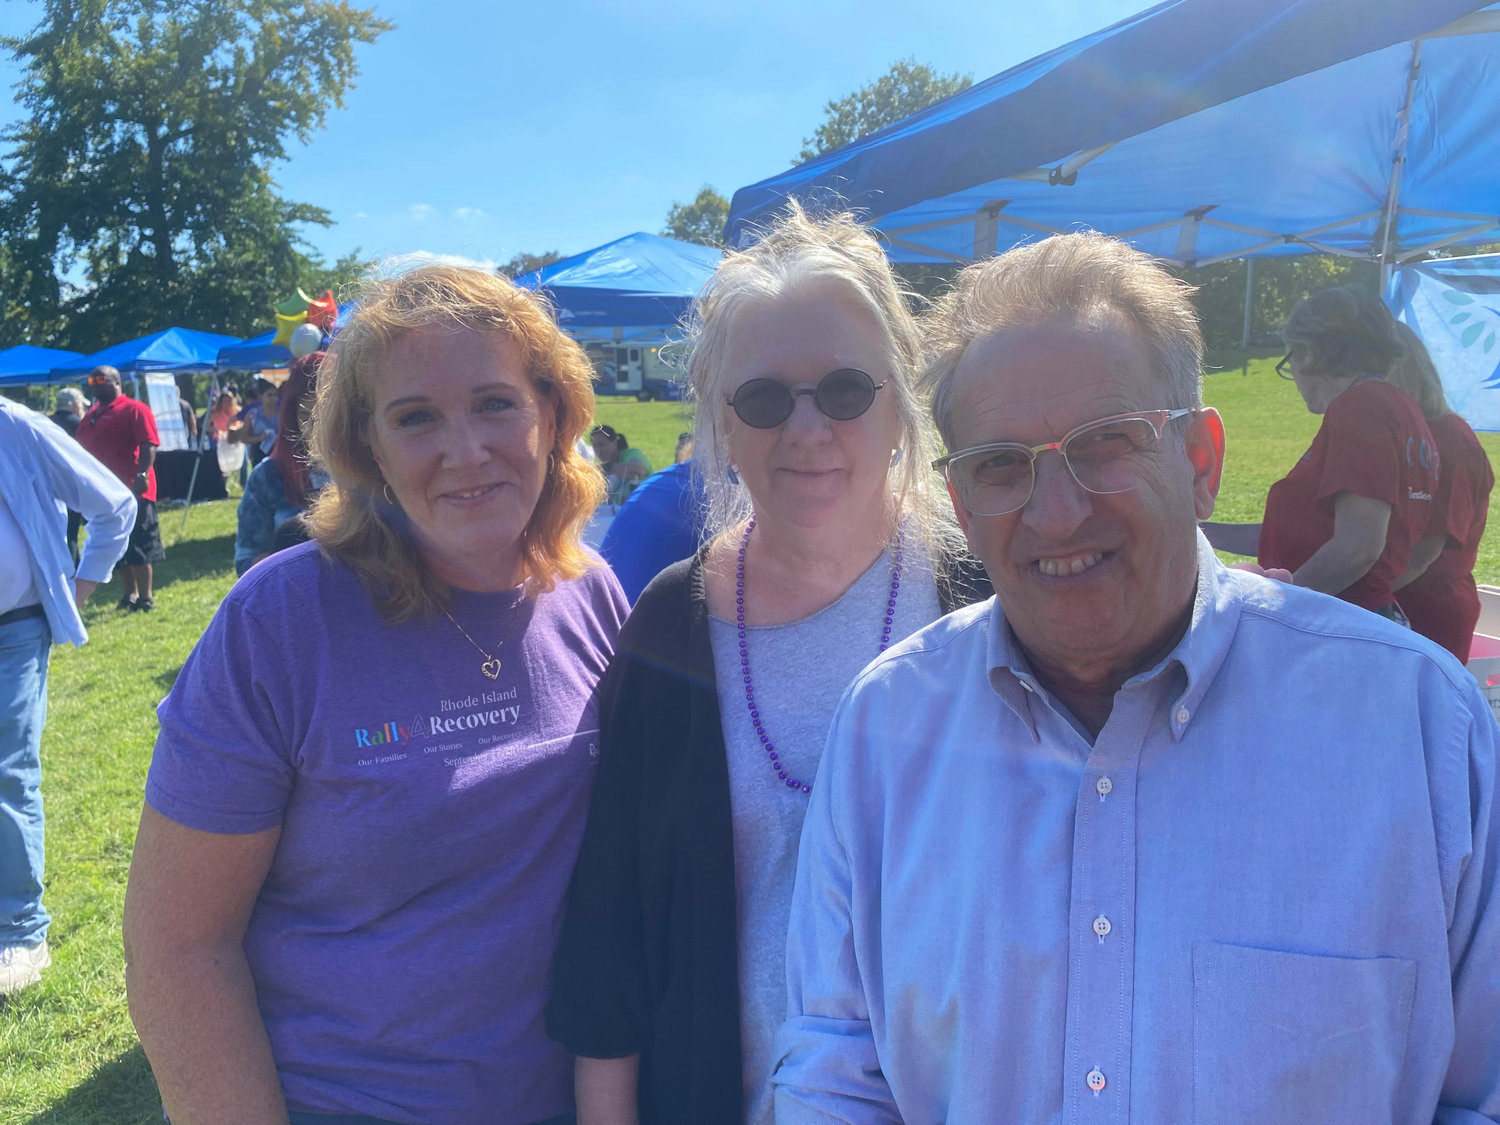 Rally4Recovery participants on Sept. 18 included, from left: Rebecca Boss, former director of R.I. BHDDH, Linda Hurley, president and CEO of CODAC, and State Sen. Josh Miller